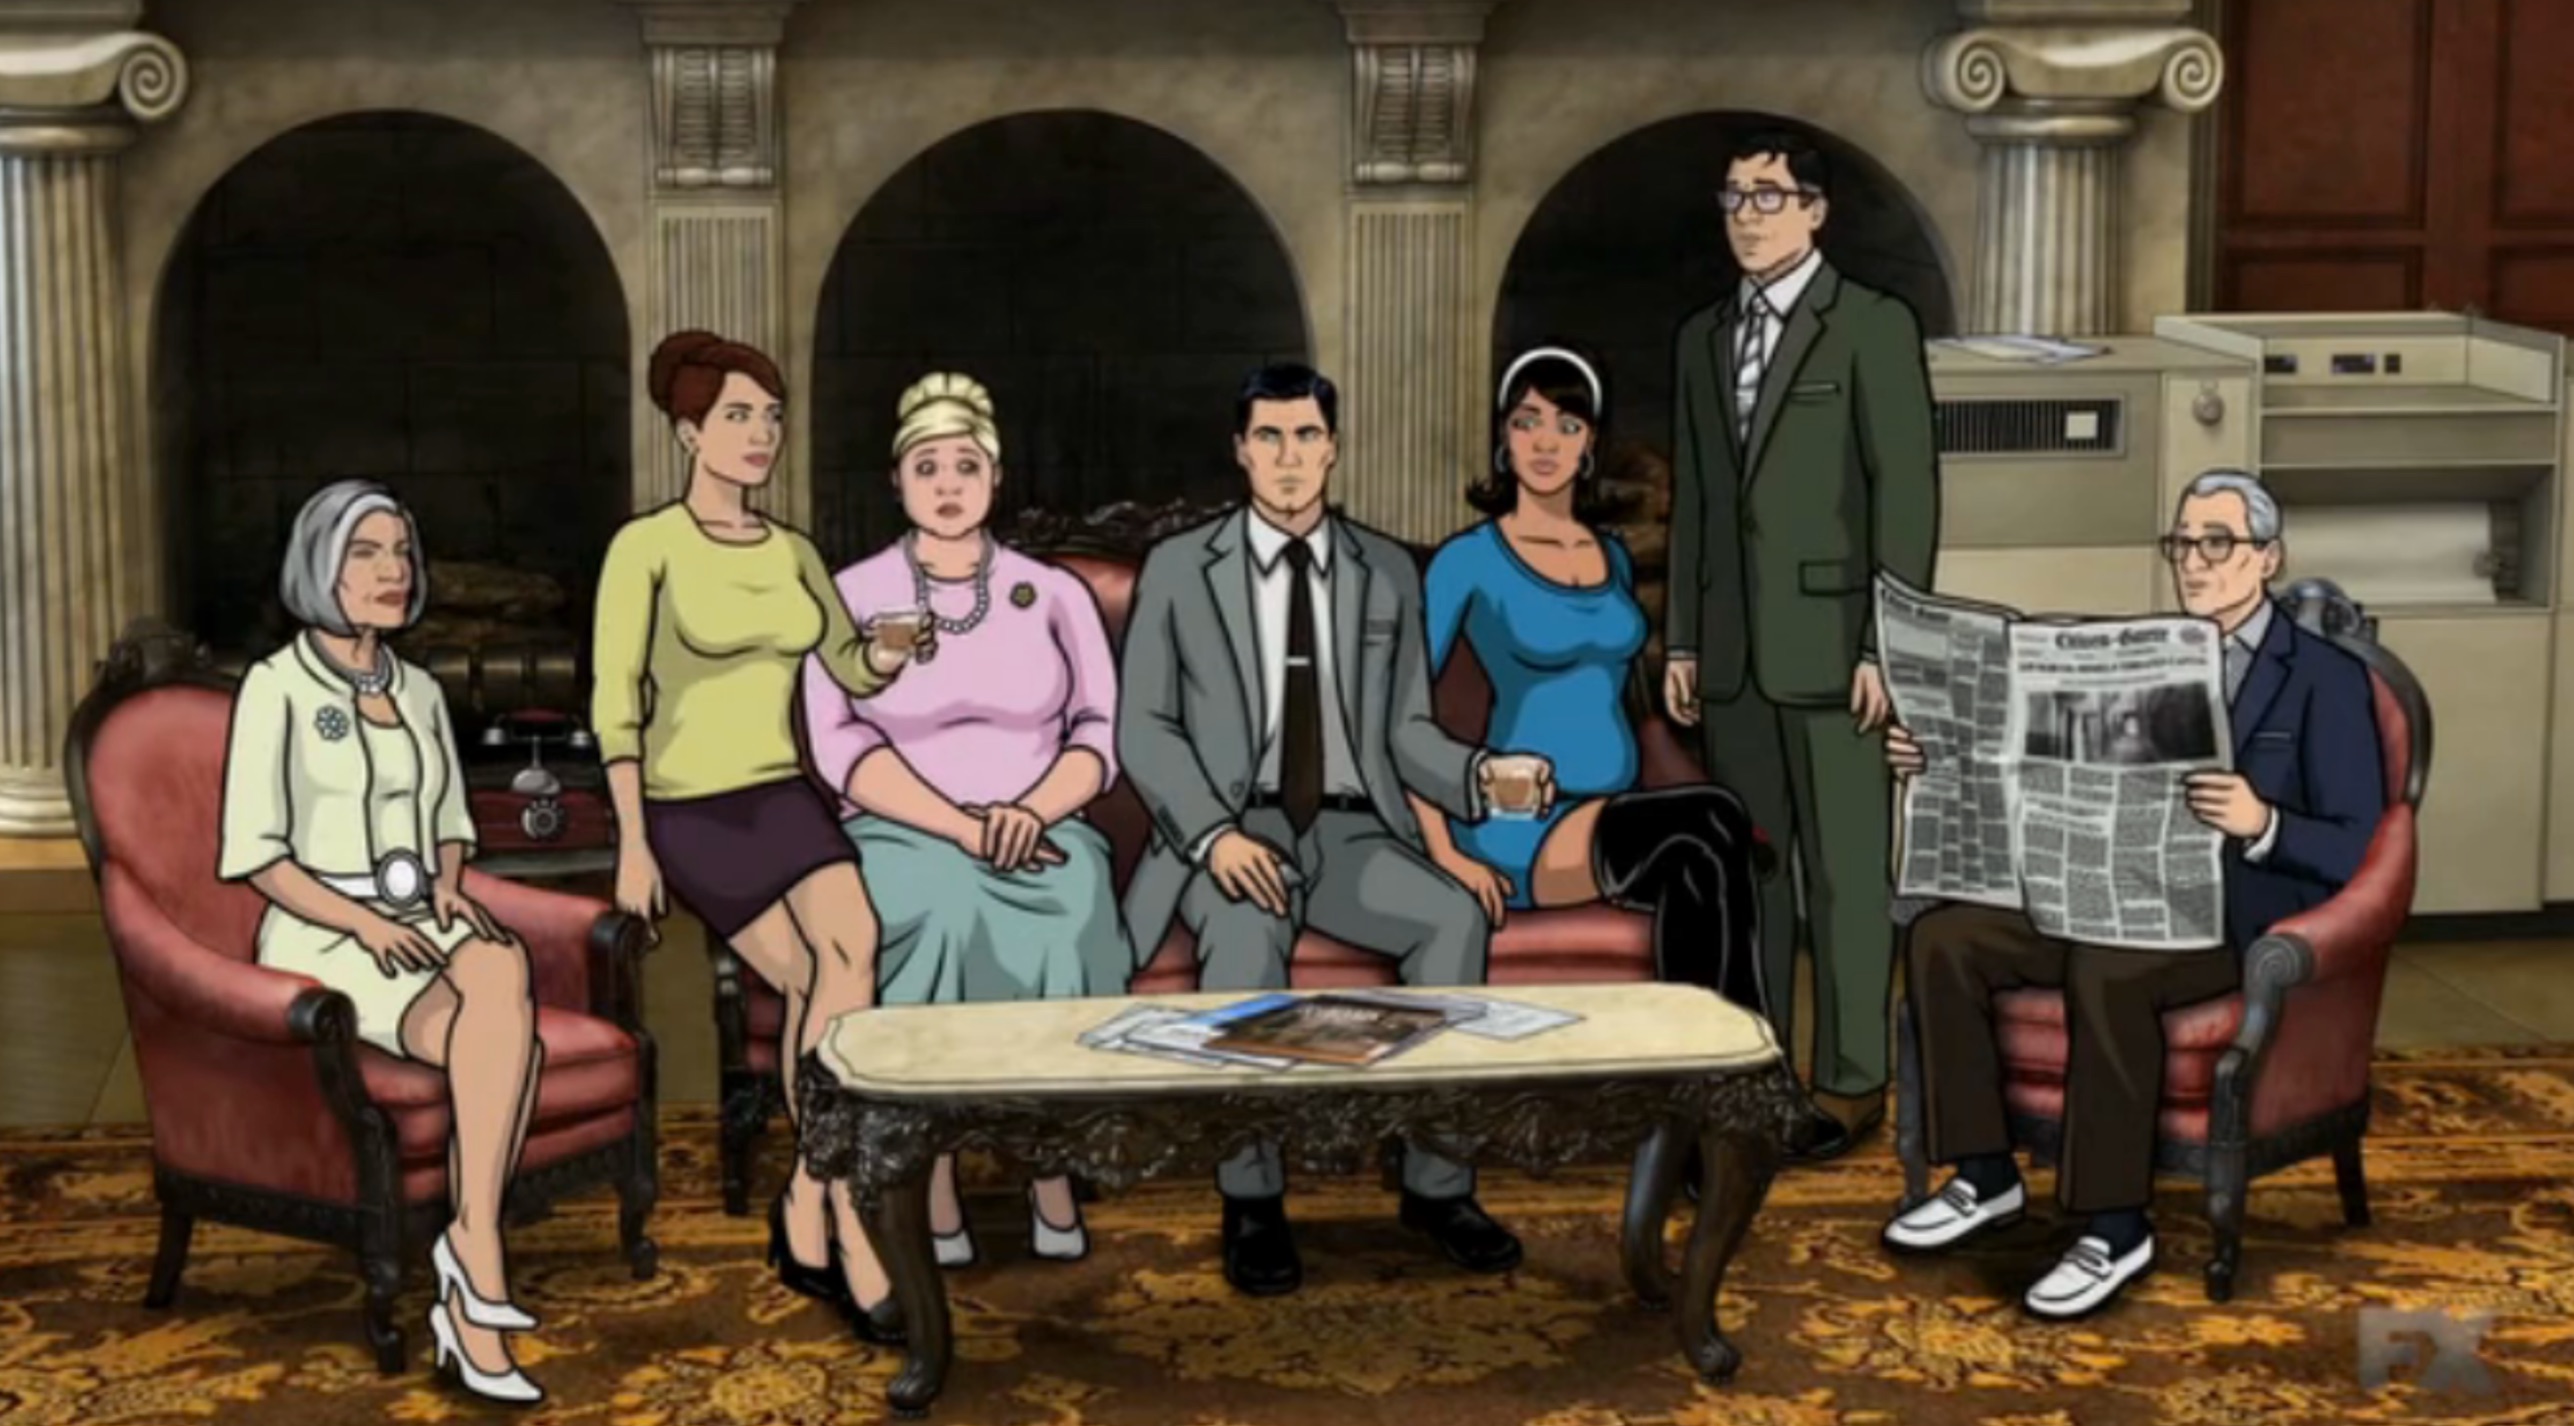 Three content marketing lessons from the marketers behind the TV show Archer.